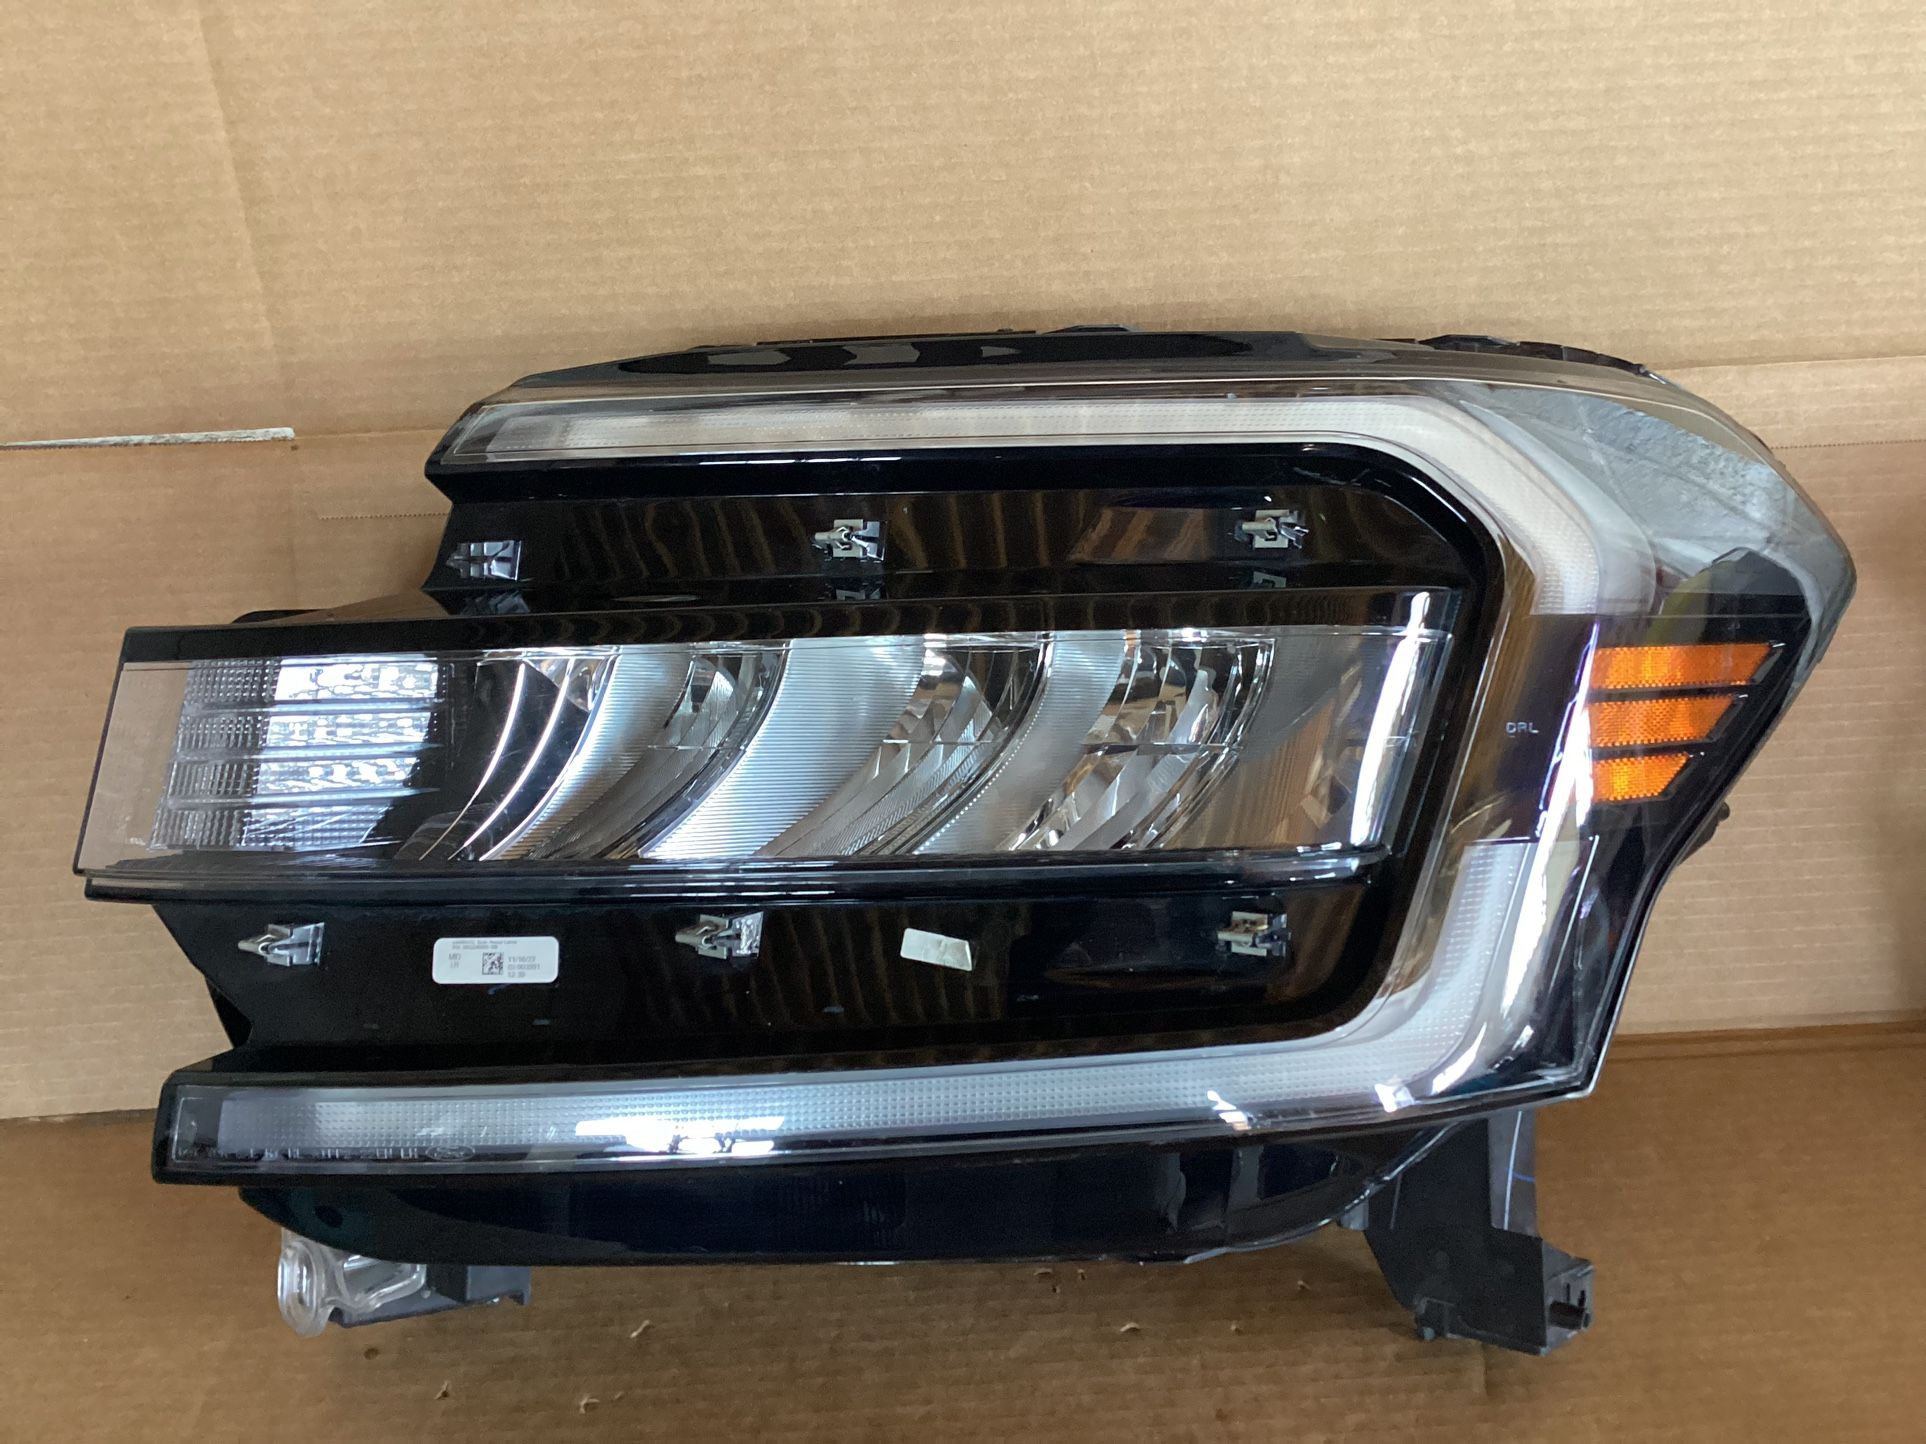 2022-23 Ford Expedition Driver FULL LED Headlight GREAT OFFER ORIGINAL🌈